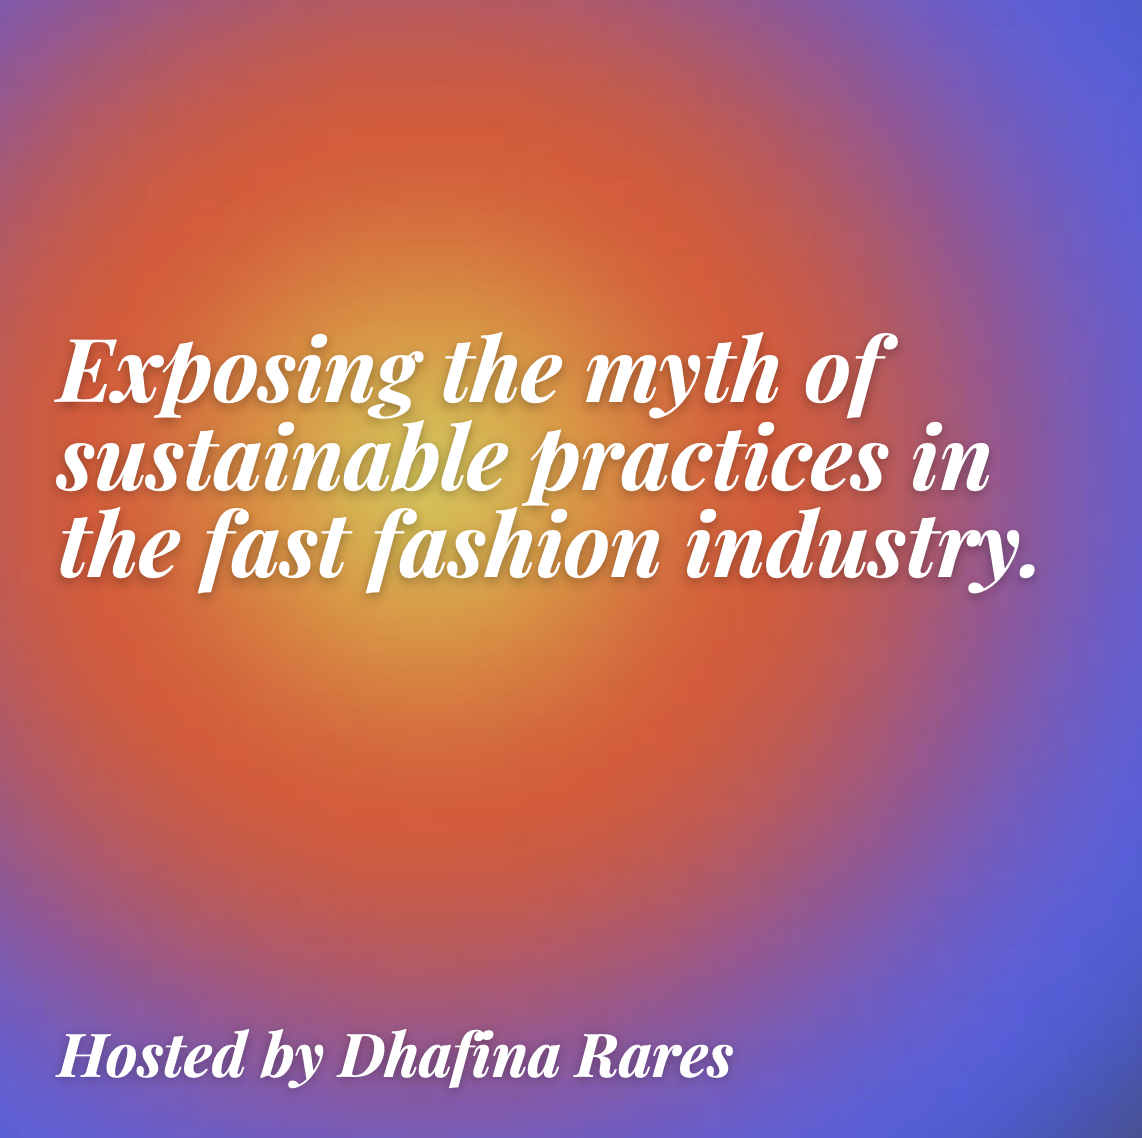 Exposing the myth of sustainable practices in the fast fashion industry.